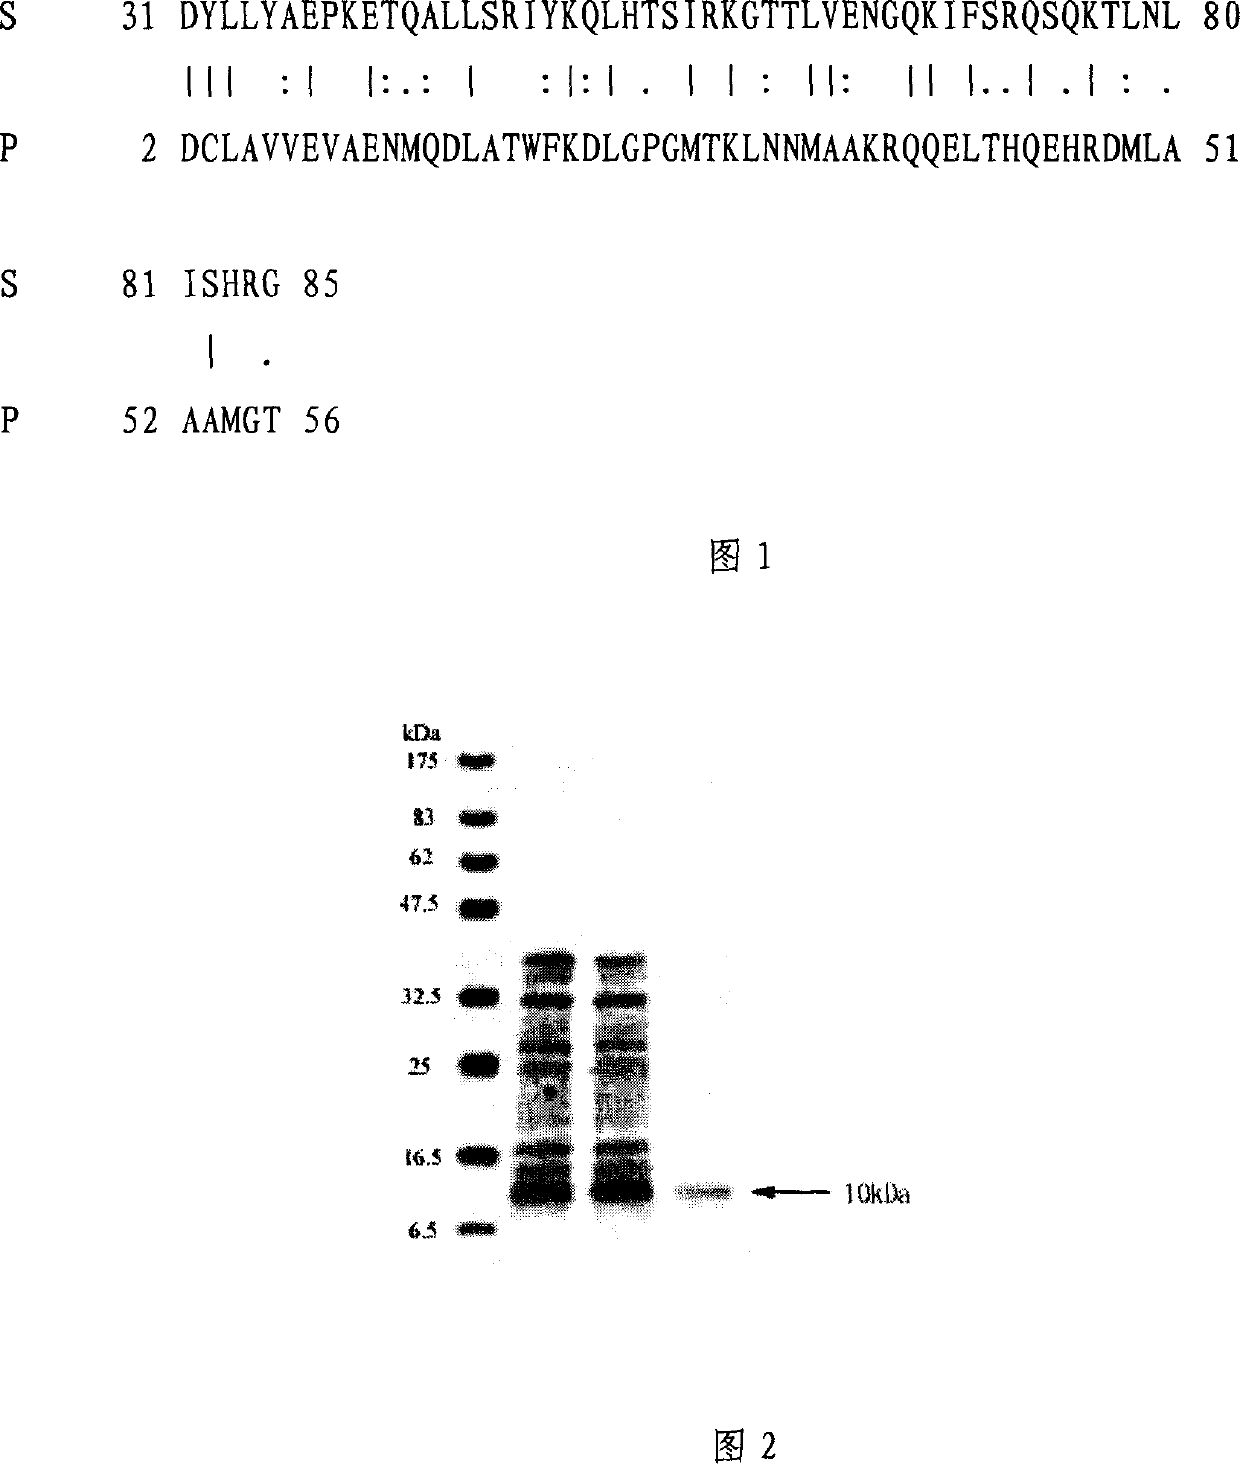 Polypeptide-human protein containing linking protein family characteristic sequential fragment-9.68 and polynucleotide for encoding it